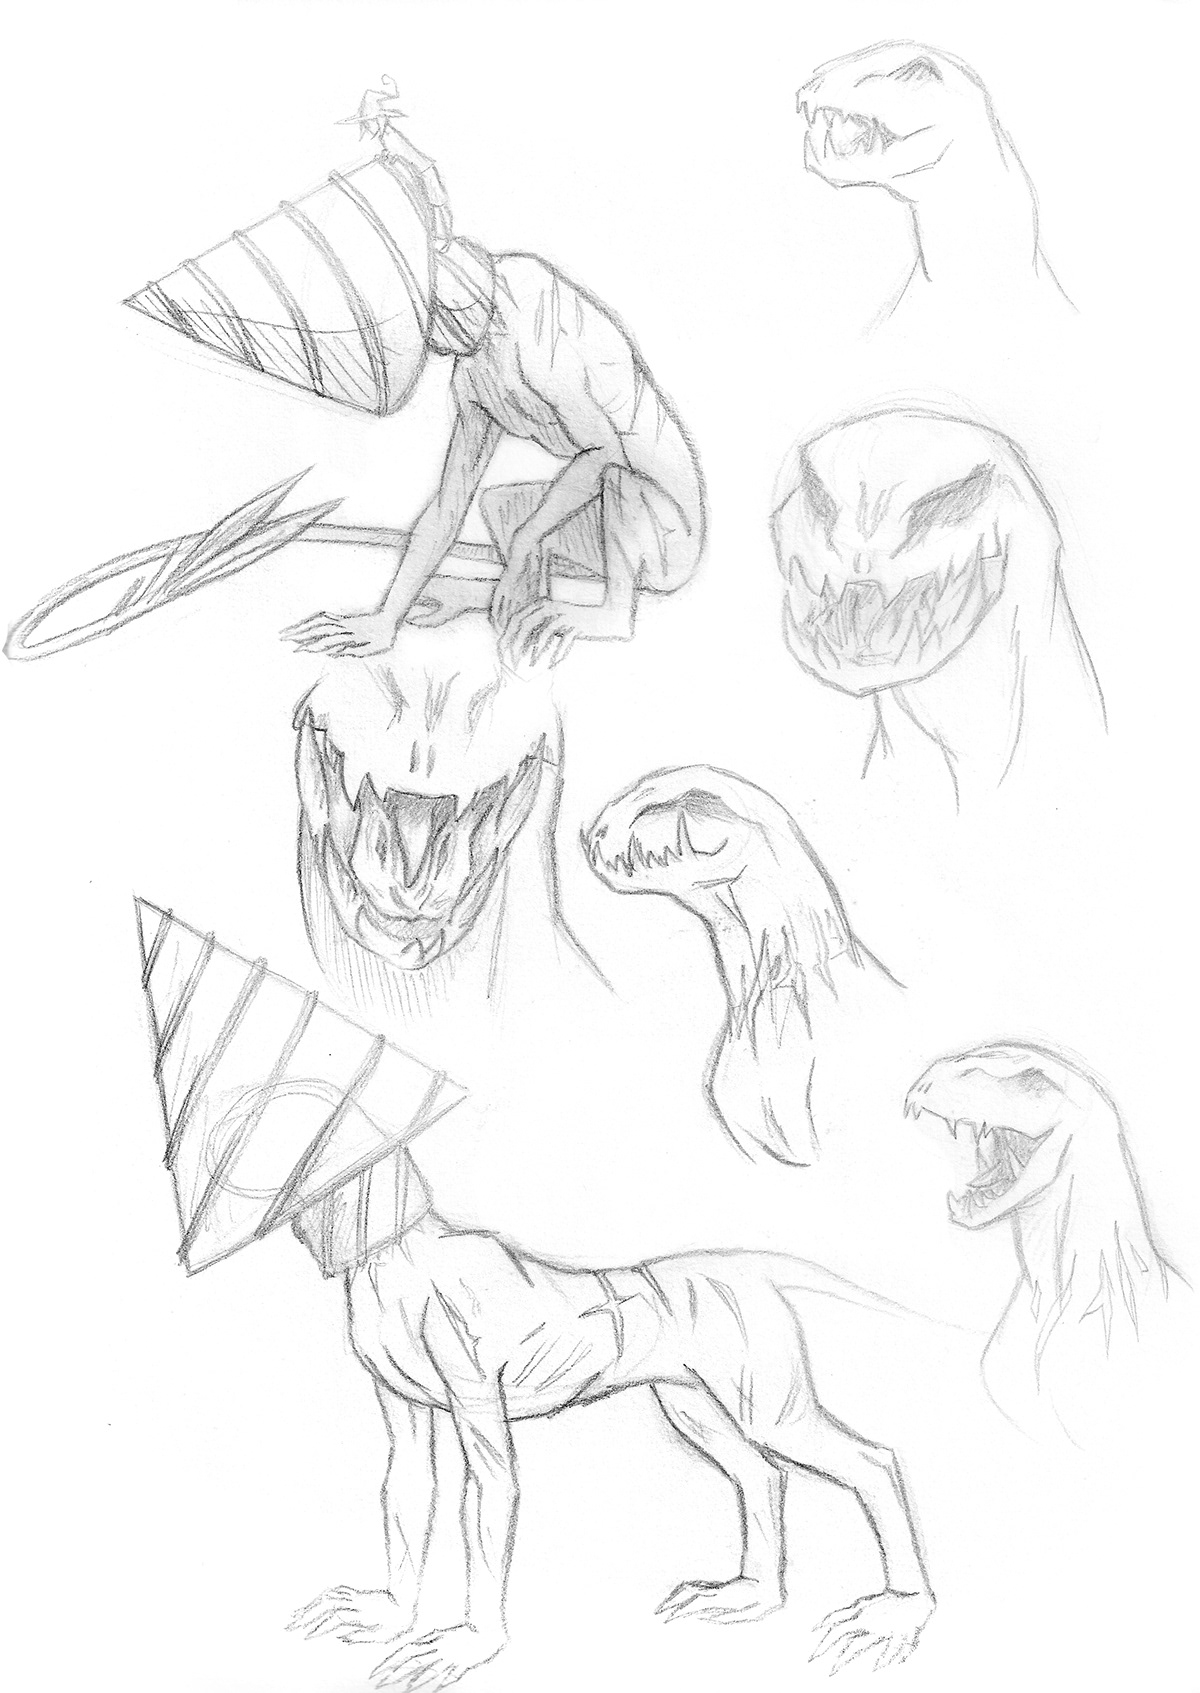 characters creatures monsters Insects quadrupeds bipeds wings sketches Androids robots aliens